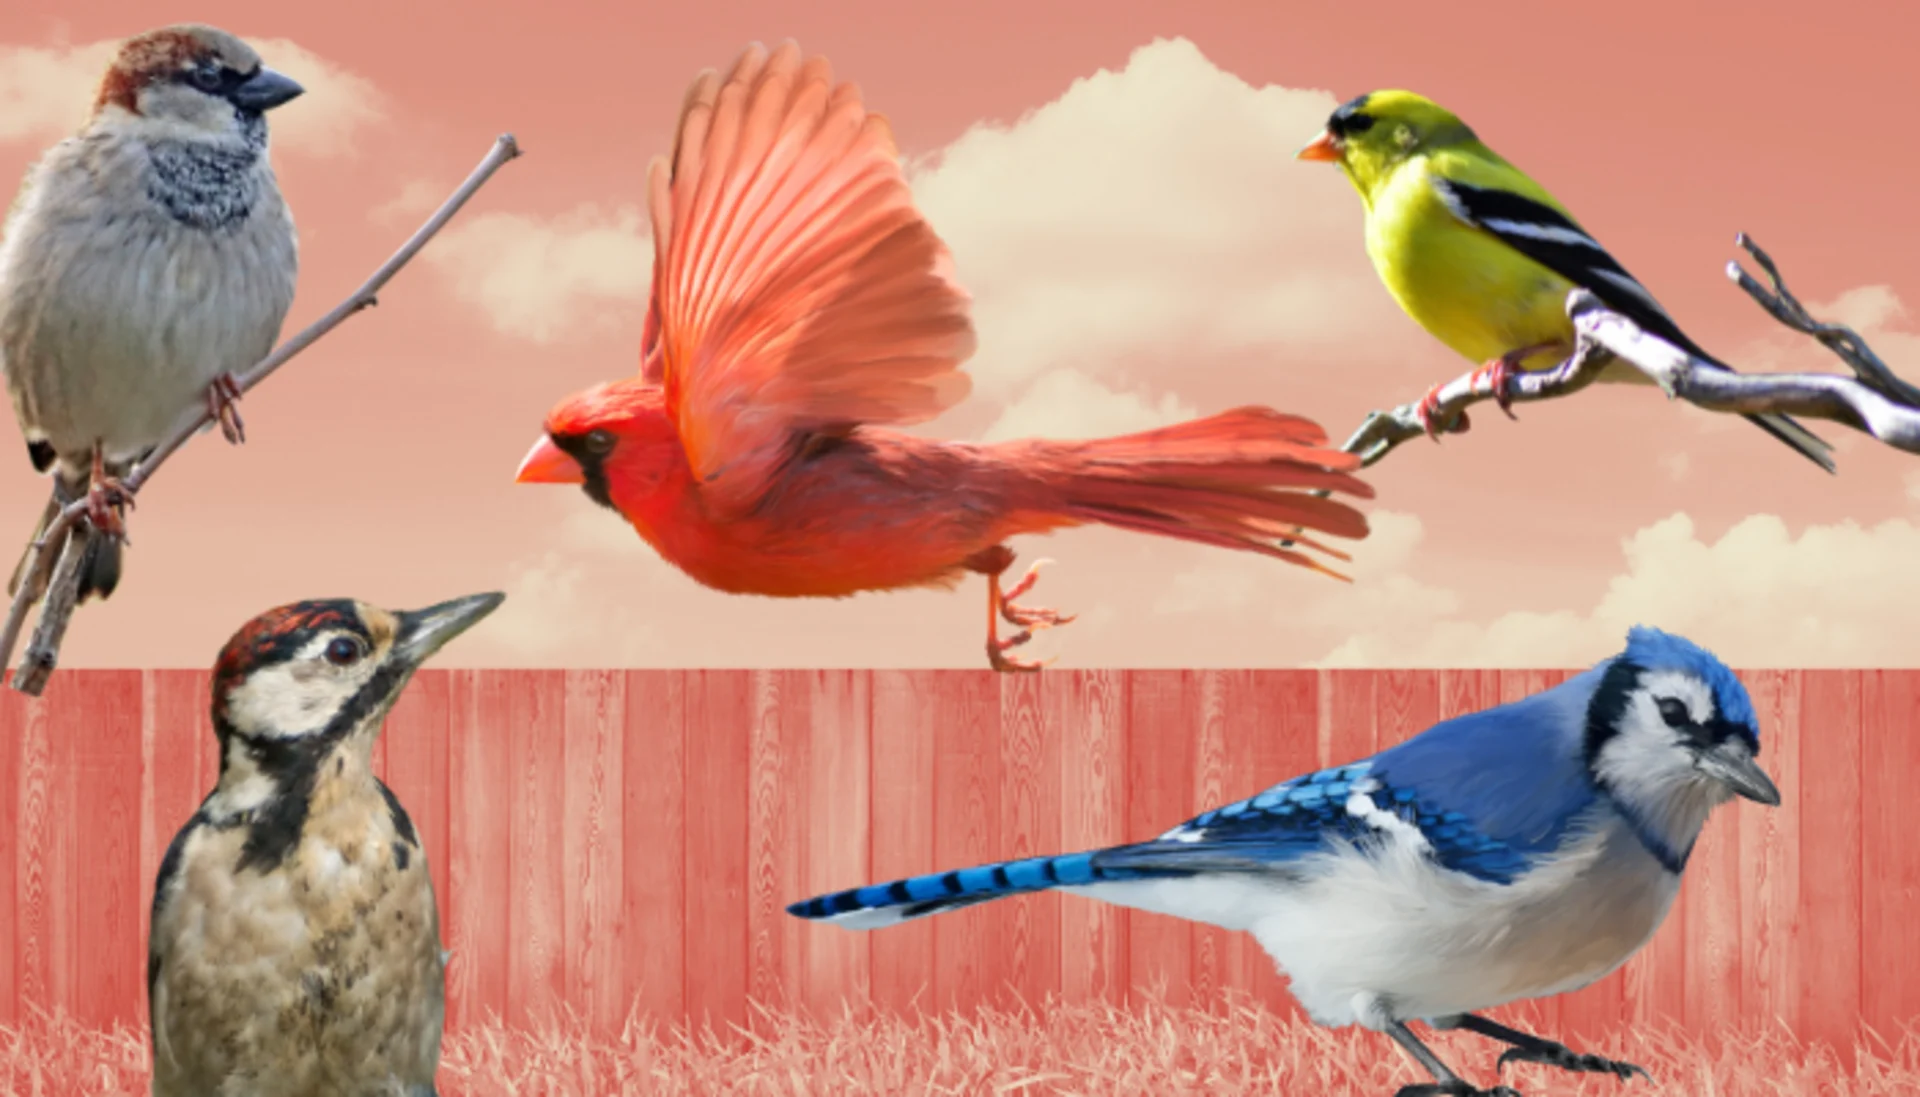 The Great Backyard Bird Count has arrived! Here's how to get involved